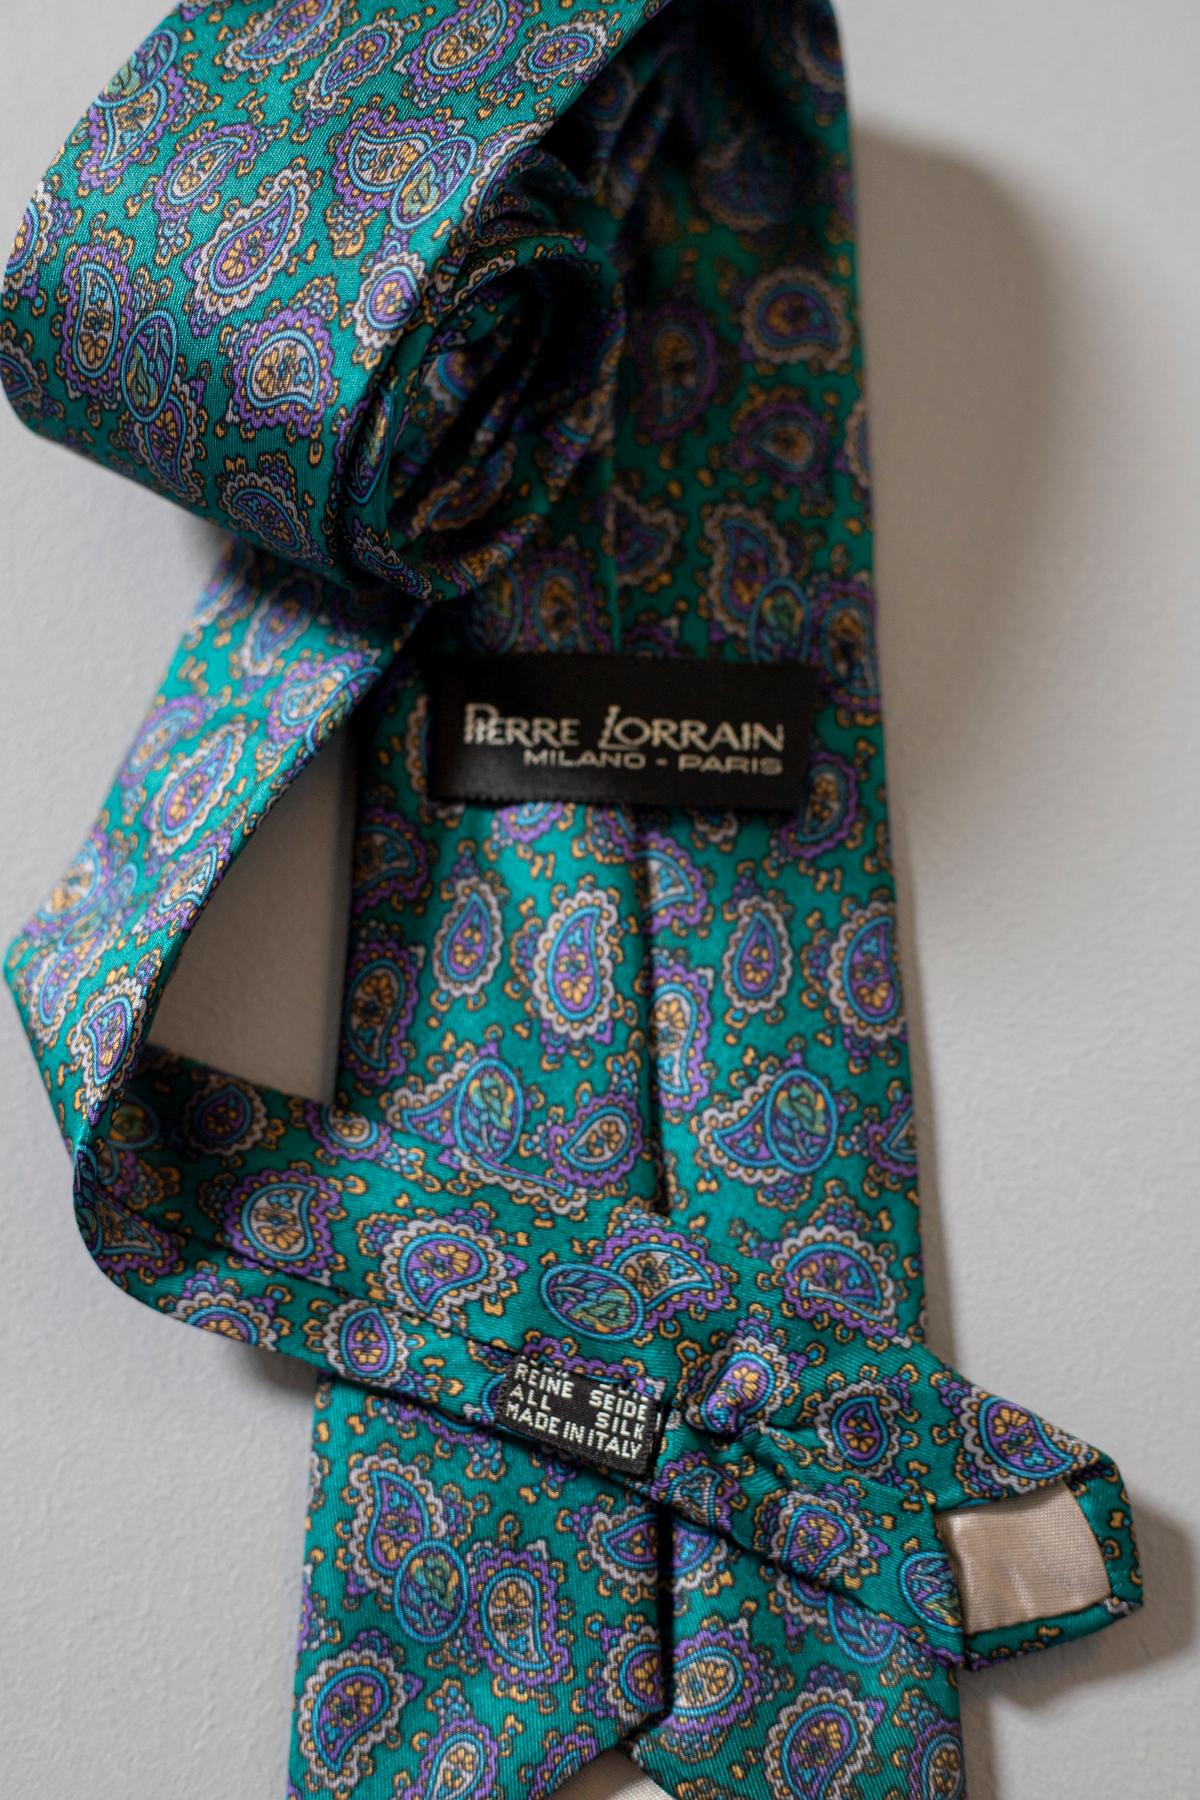 Vintage Pierre Lorrain 100% silk tie with paisley motifs In Good Condition For Sale In Milano, IT